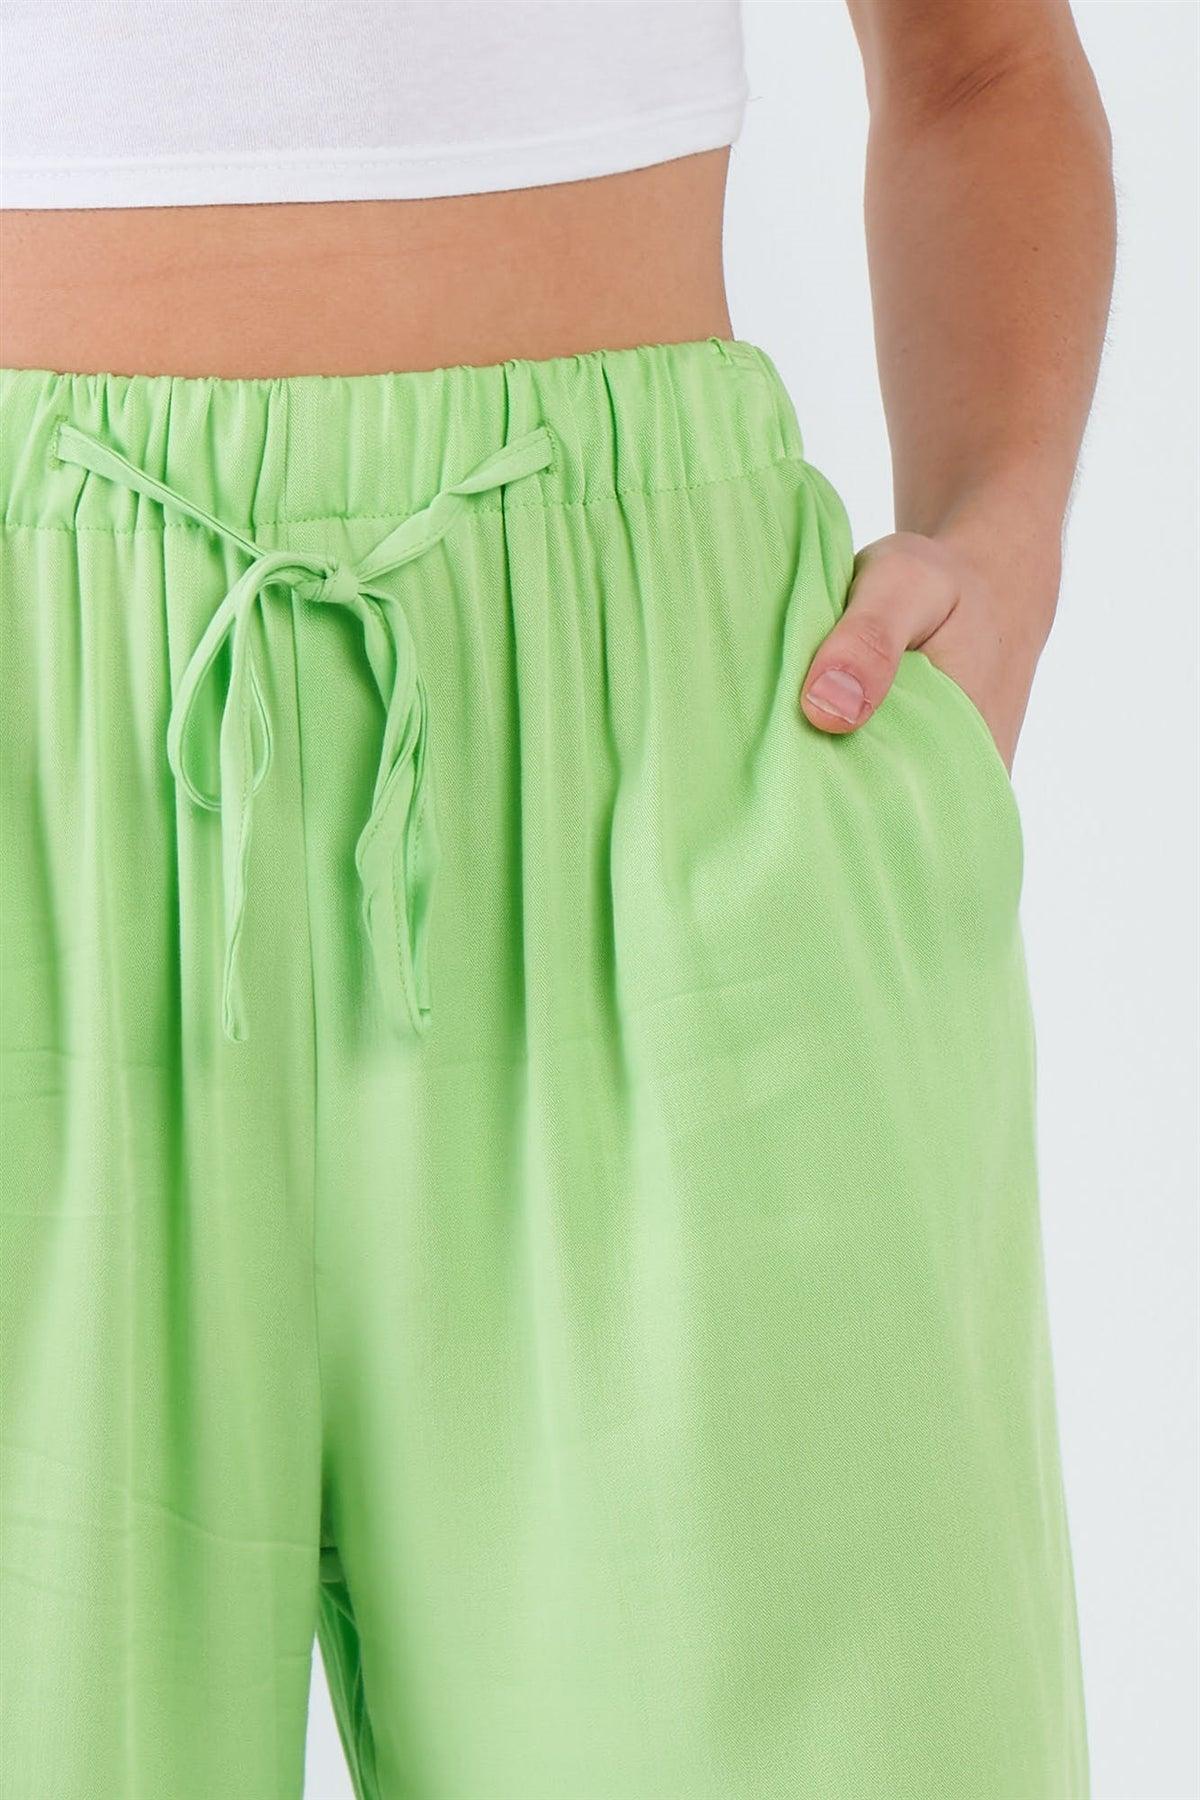 Neon Green Cotton Relaxed Fit Casual Wide Leg Ankle Pant   /3-2-1